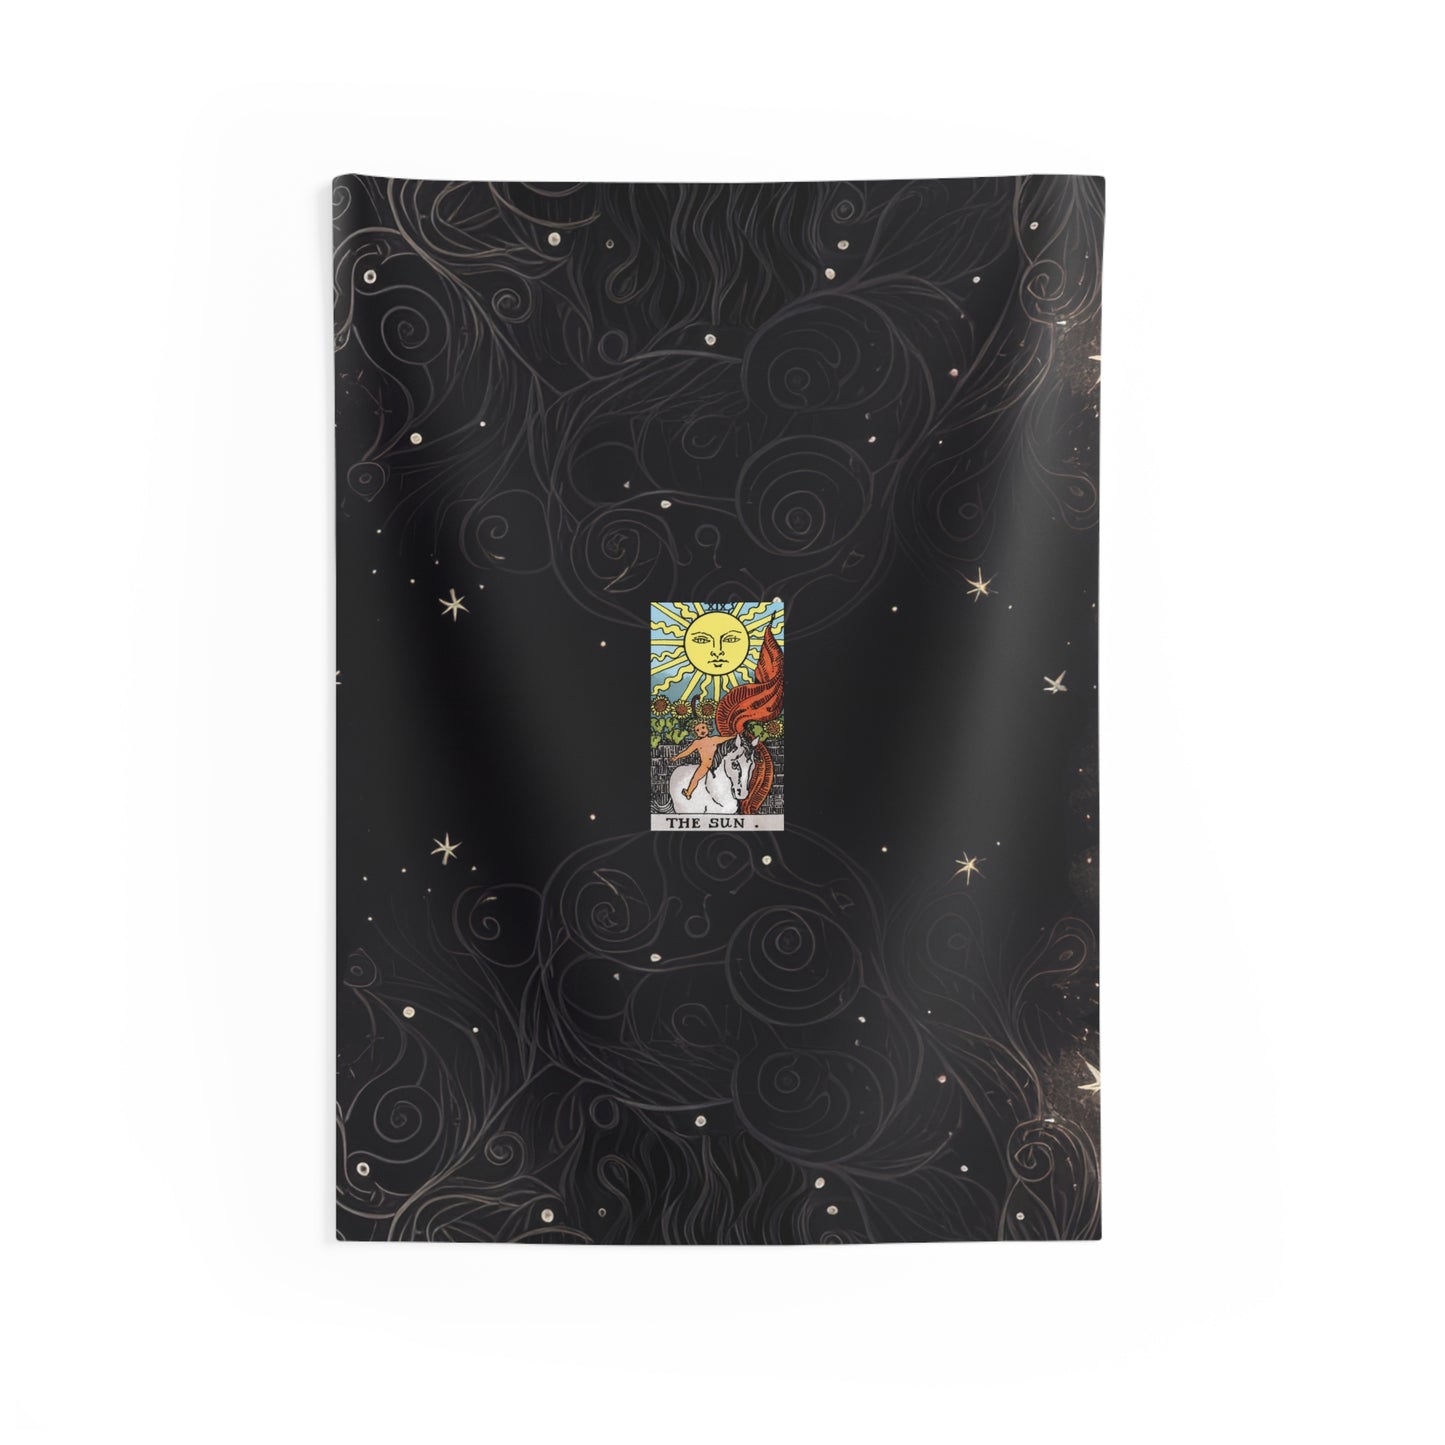 The Sun Tarot Card Altar Cloth or Tapestry with Starry Background